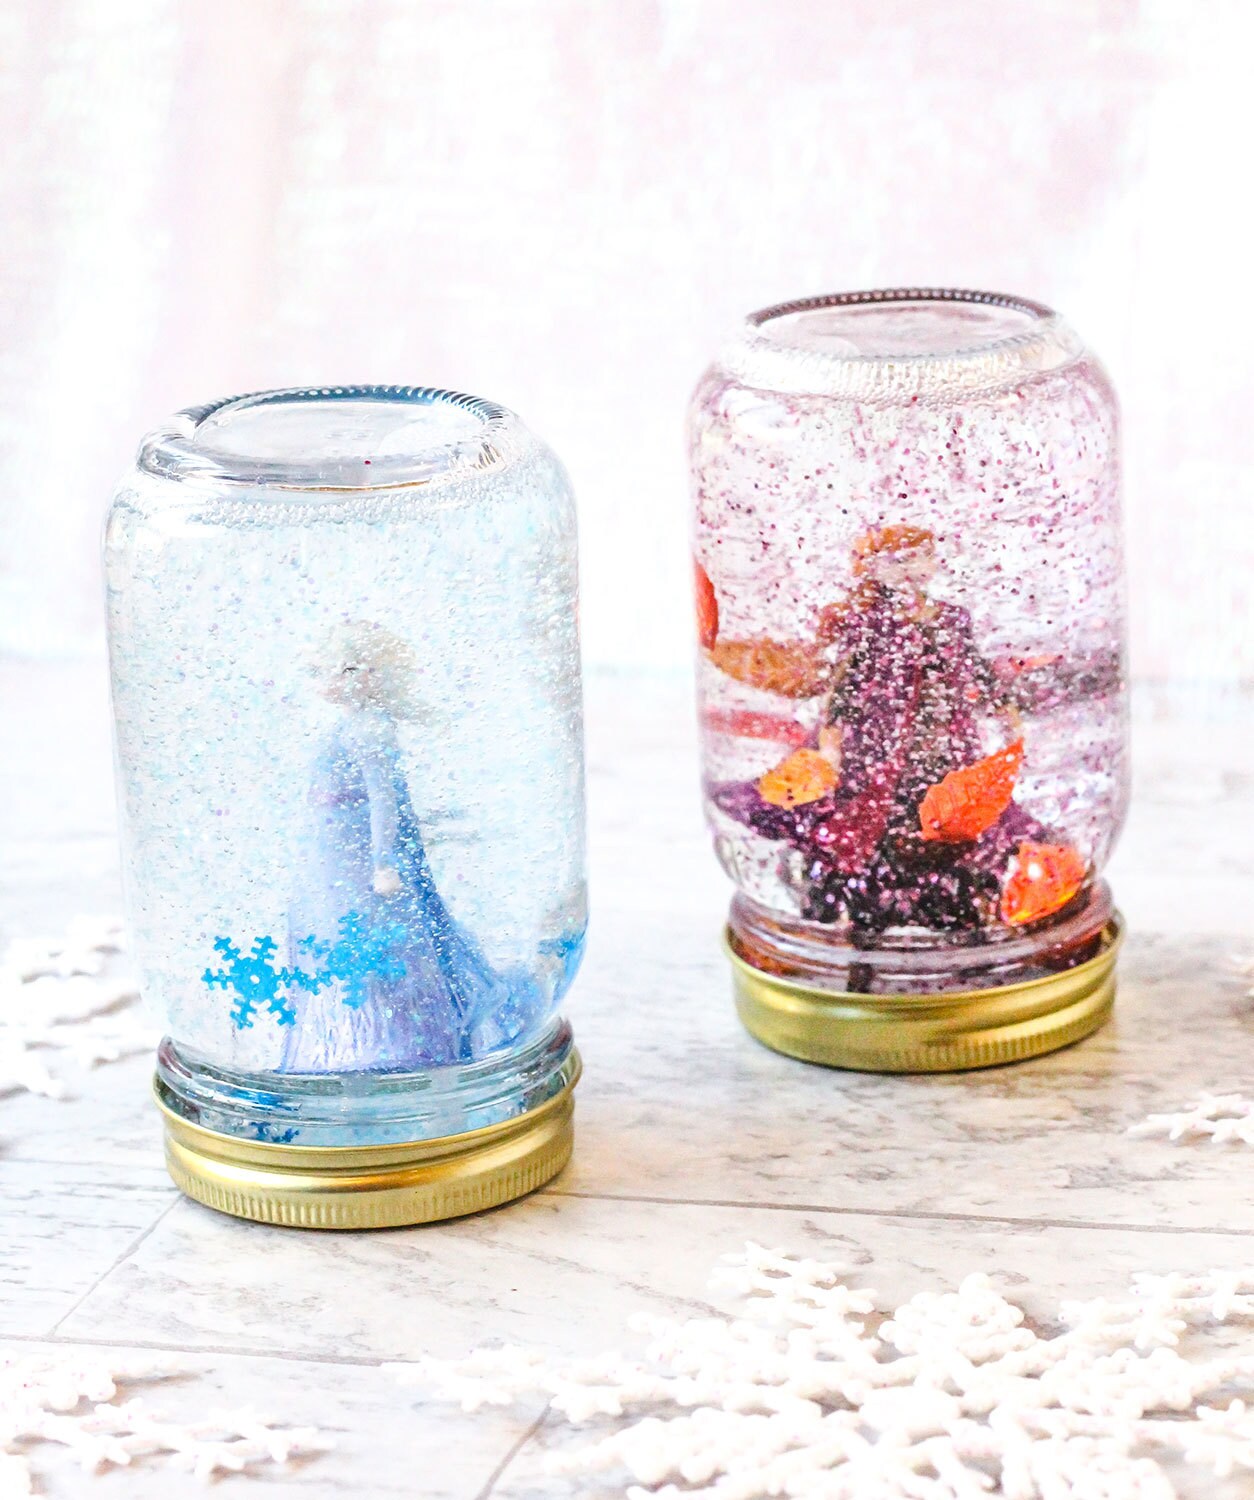 Two Frozen II-inspired snow globes filled with glitter. One snow globe has Elsa and blue snowflake sequins inside, and the other features Anna and orange leaf sequins.